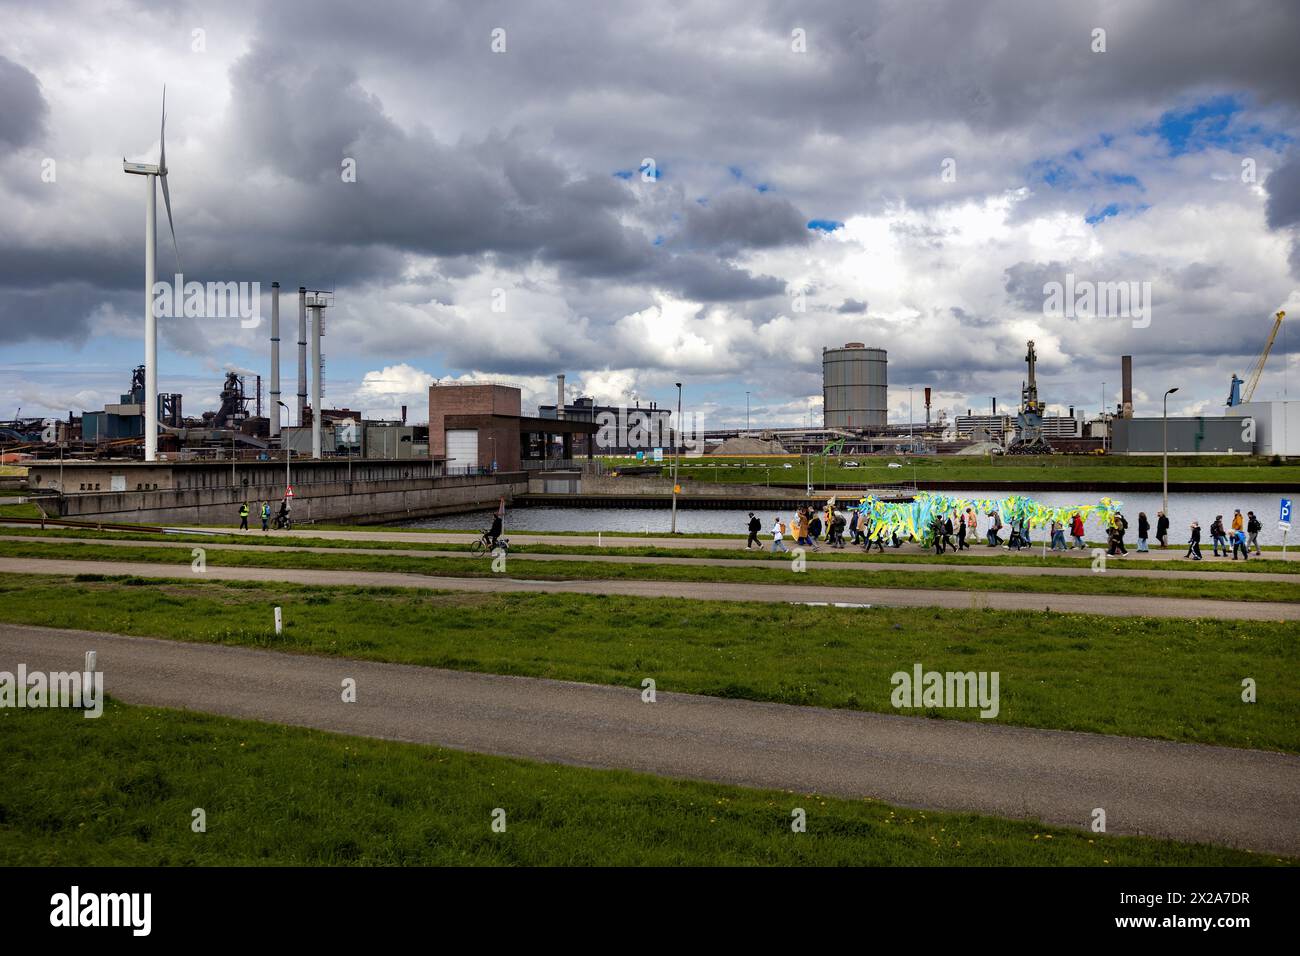 IJMUIDEN - Local residents and members of Greenpeace walk to the headquarters of Tata Steel. The walk is a protest against pollution from the steel factory. ANP RAMON VAN FLYMEN netherlands out - belgium out Stock Photo